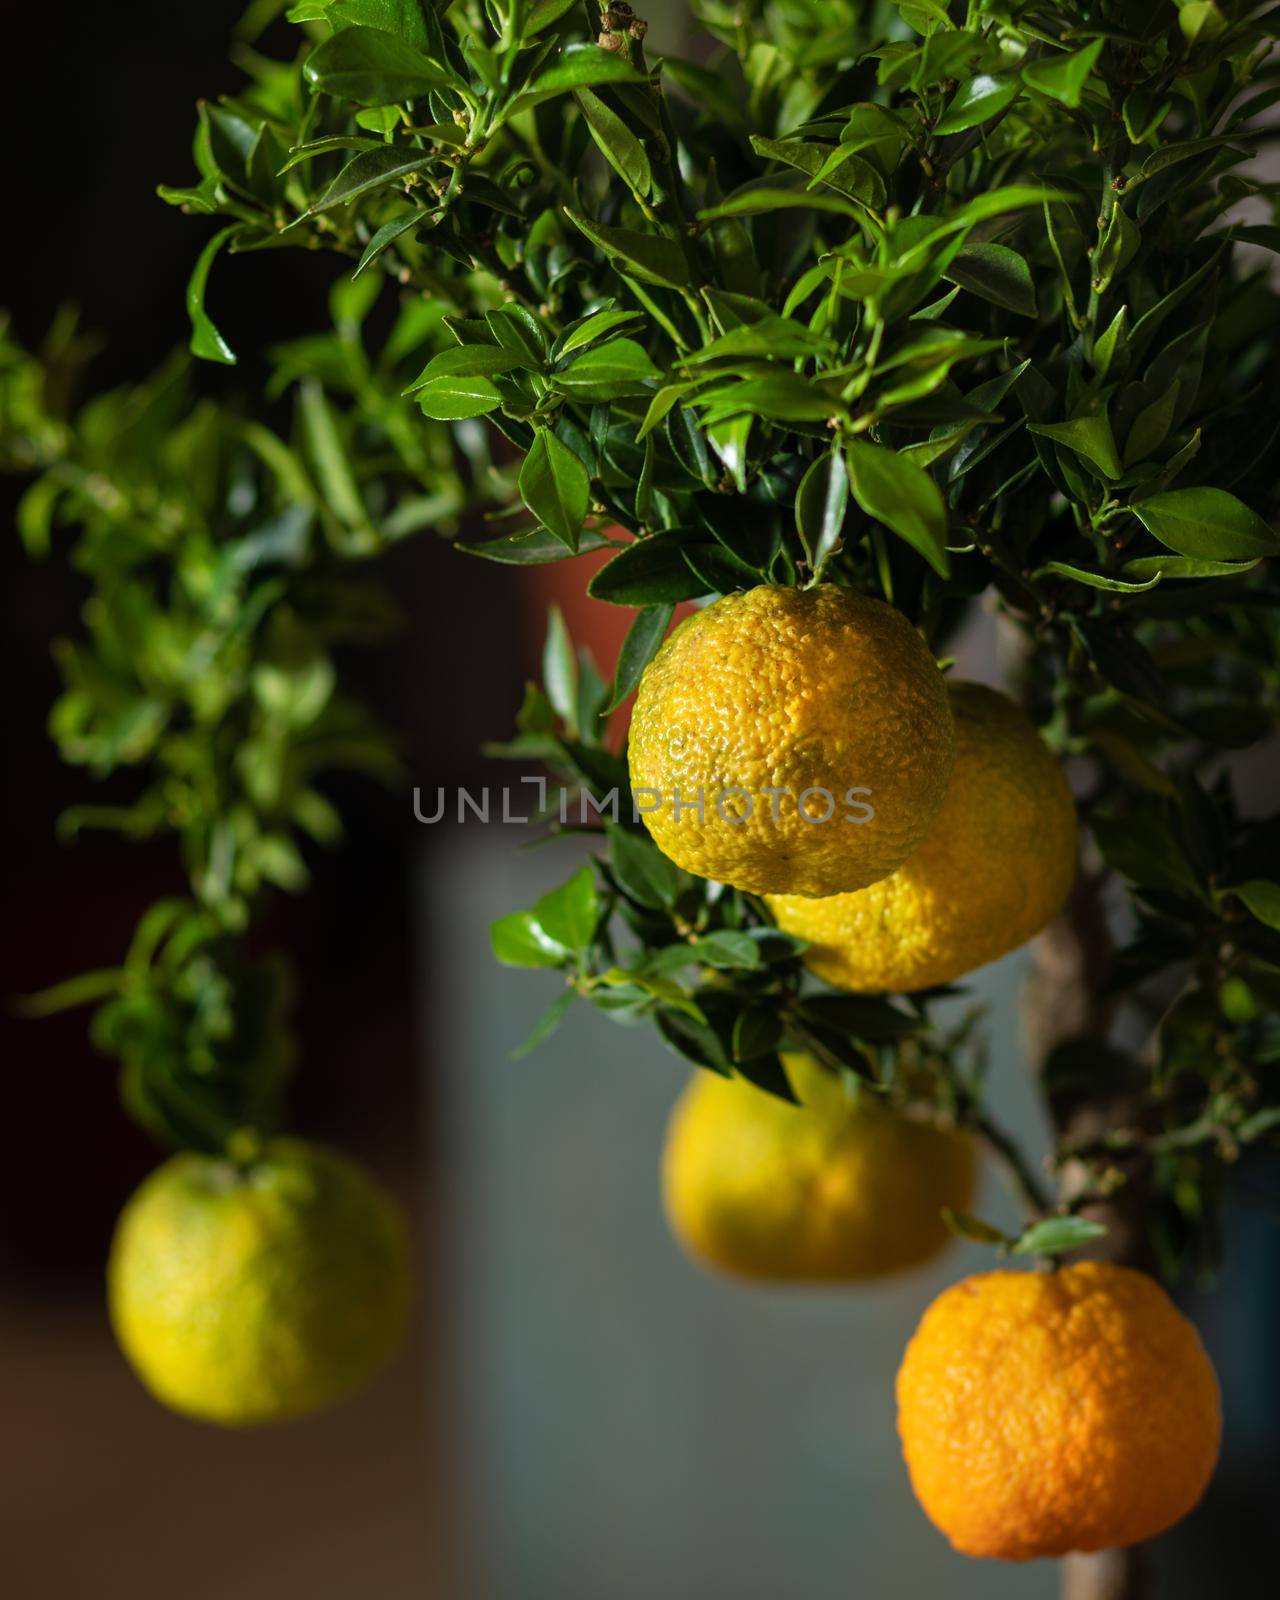 Lemon plant close up with dark background by ferhad